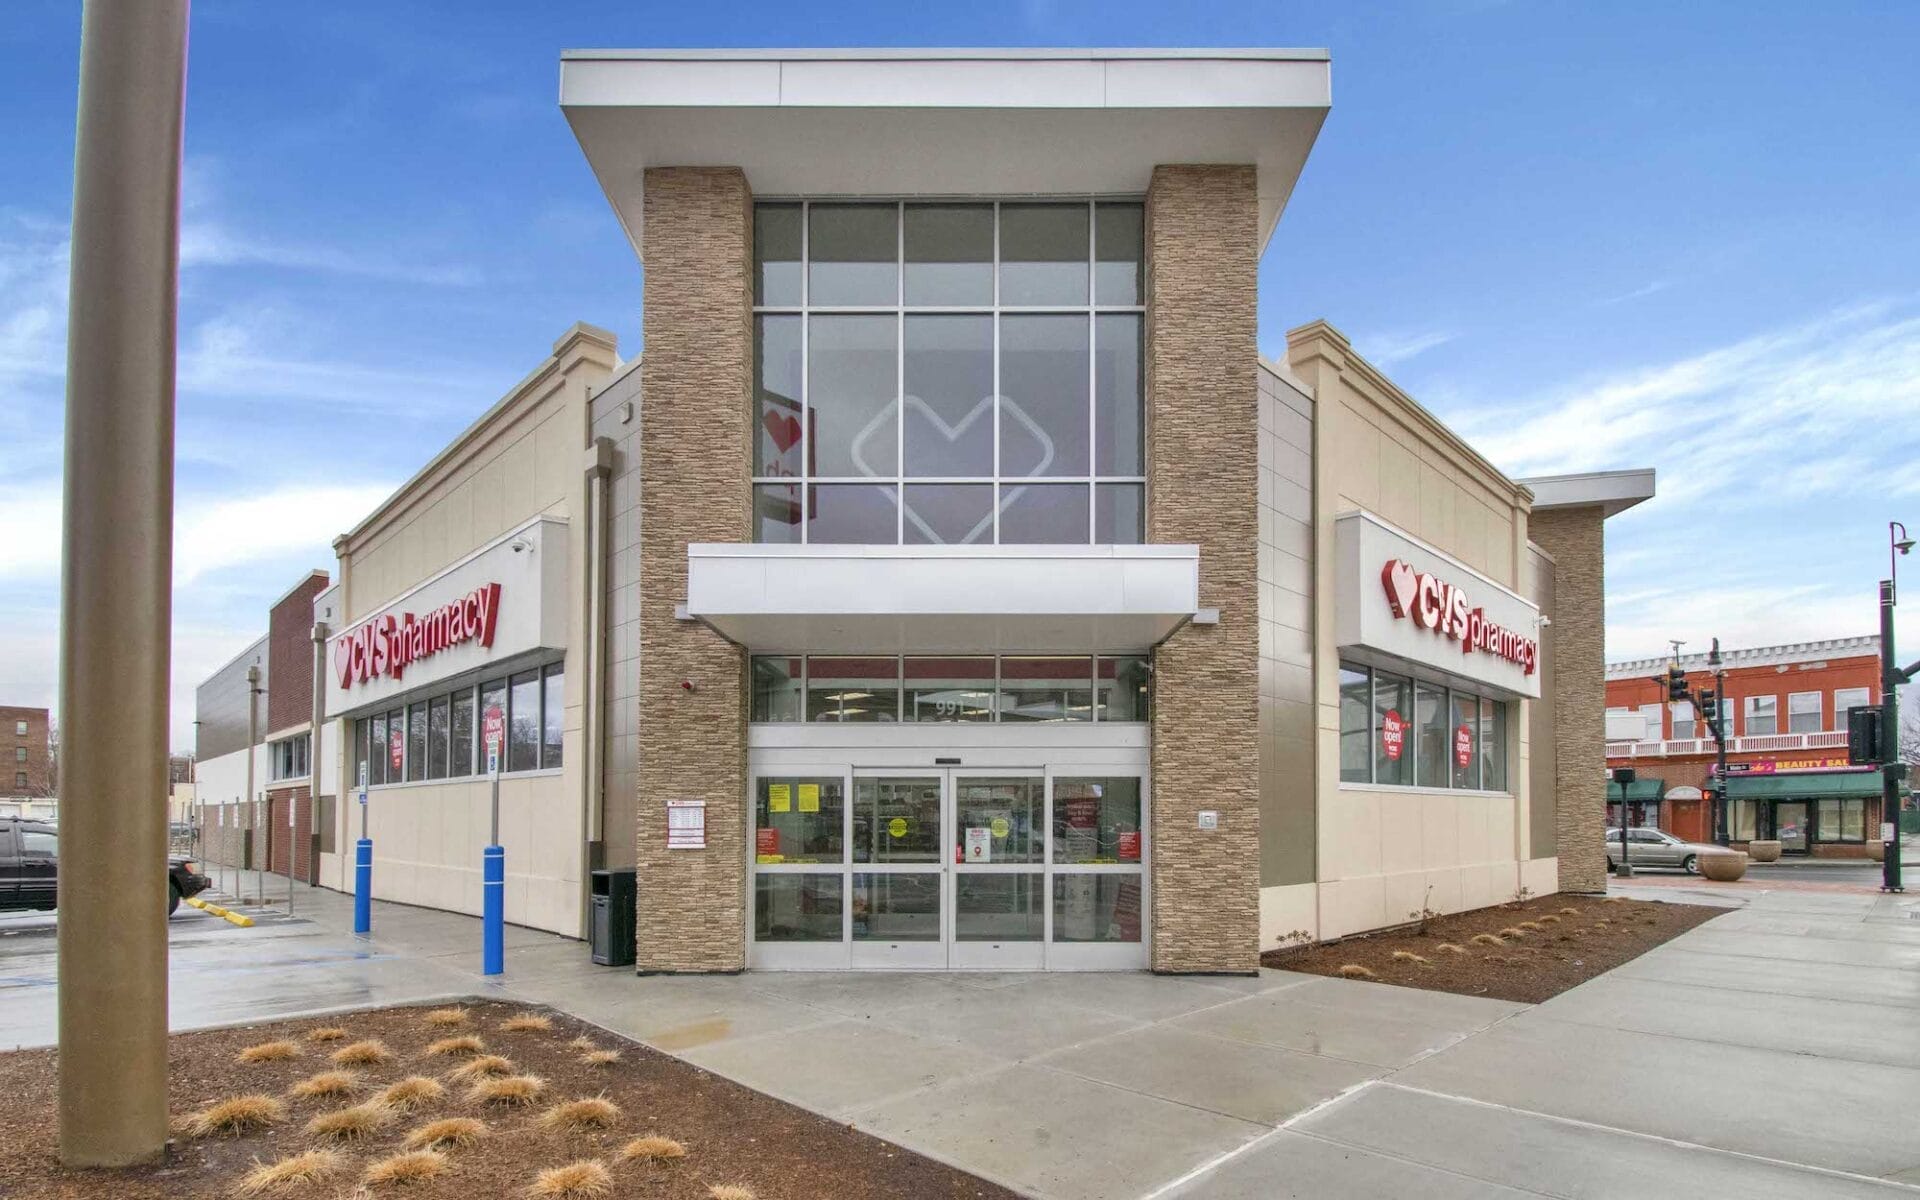 Exterior view of a CVS Pharmacy leasehold closing in Belle Mead, New Jersey, featuring a large entrance with glass doors and two smaller storefronts under a cloudy sky.